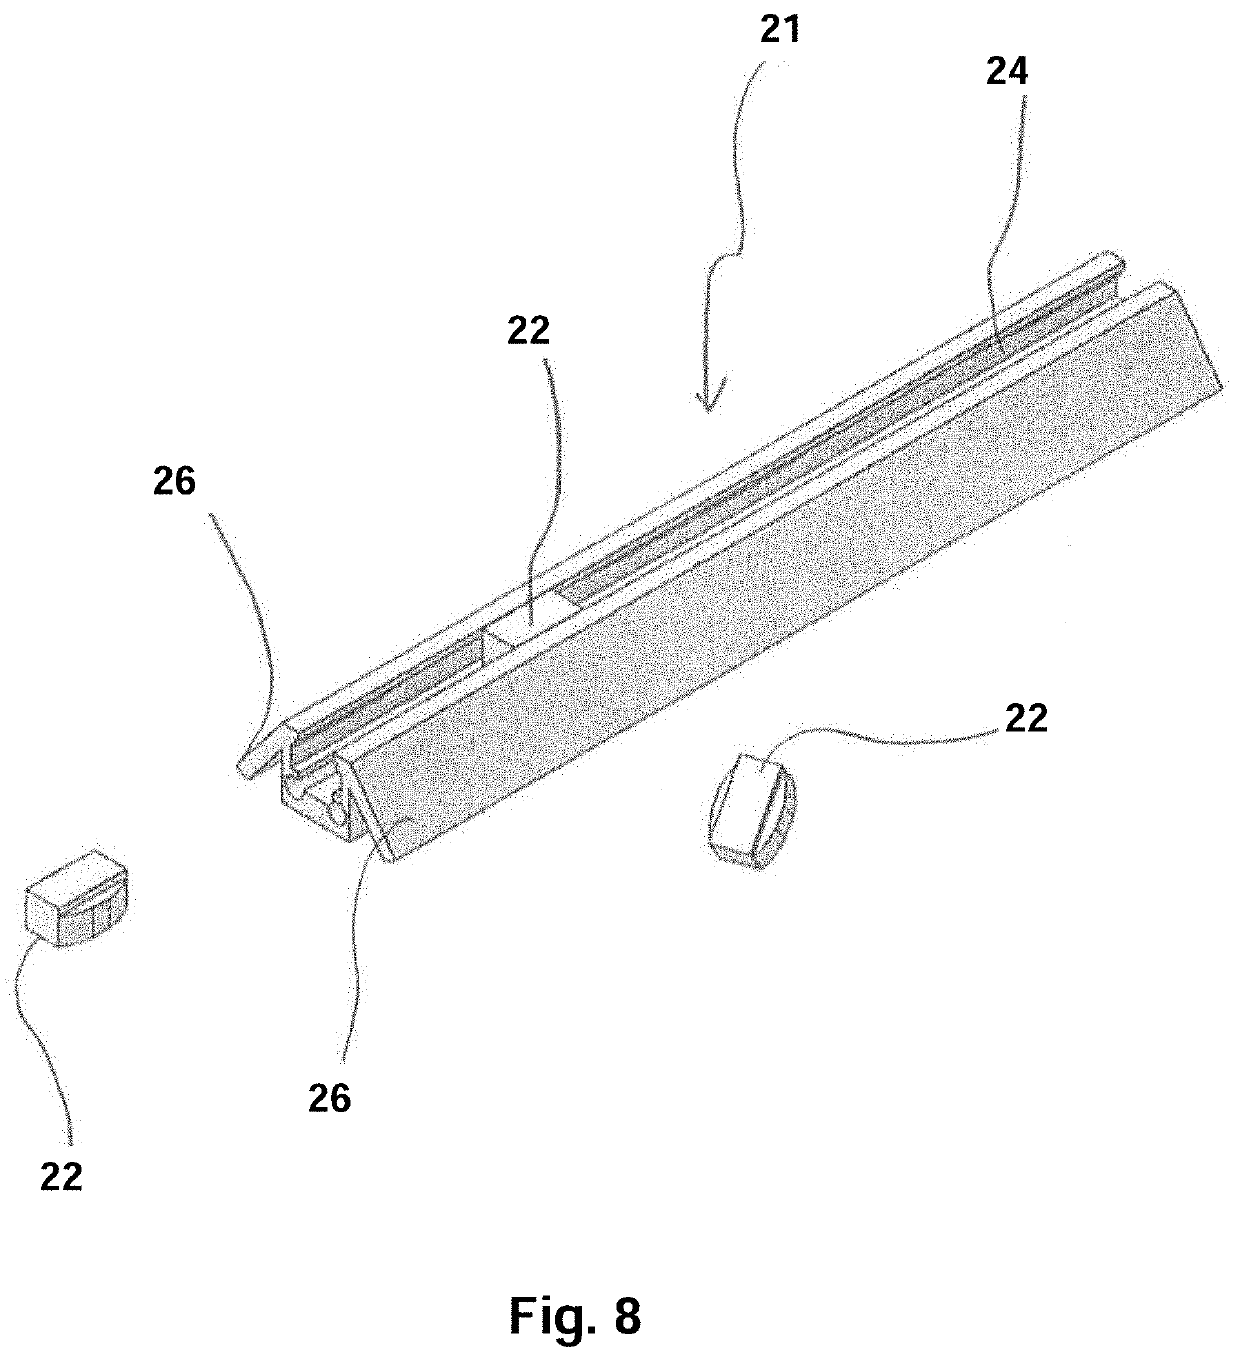 Support device for securing sheet material to a backing surface and method of using same